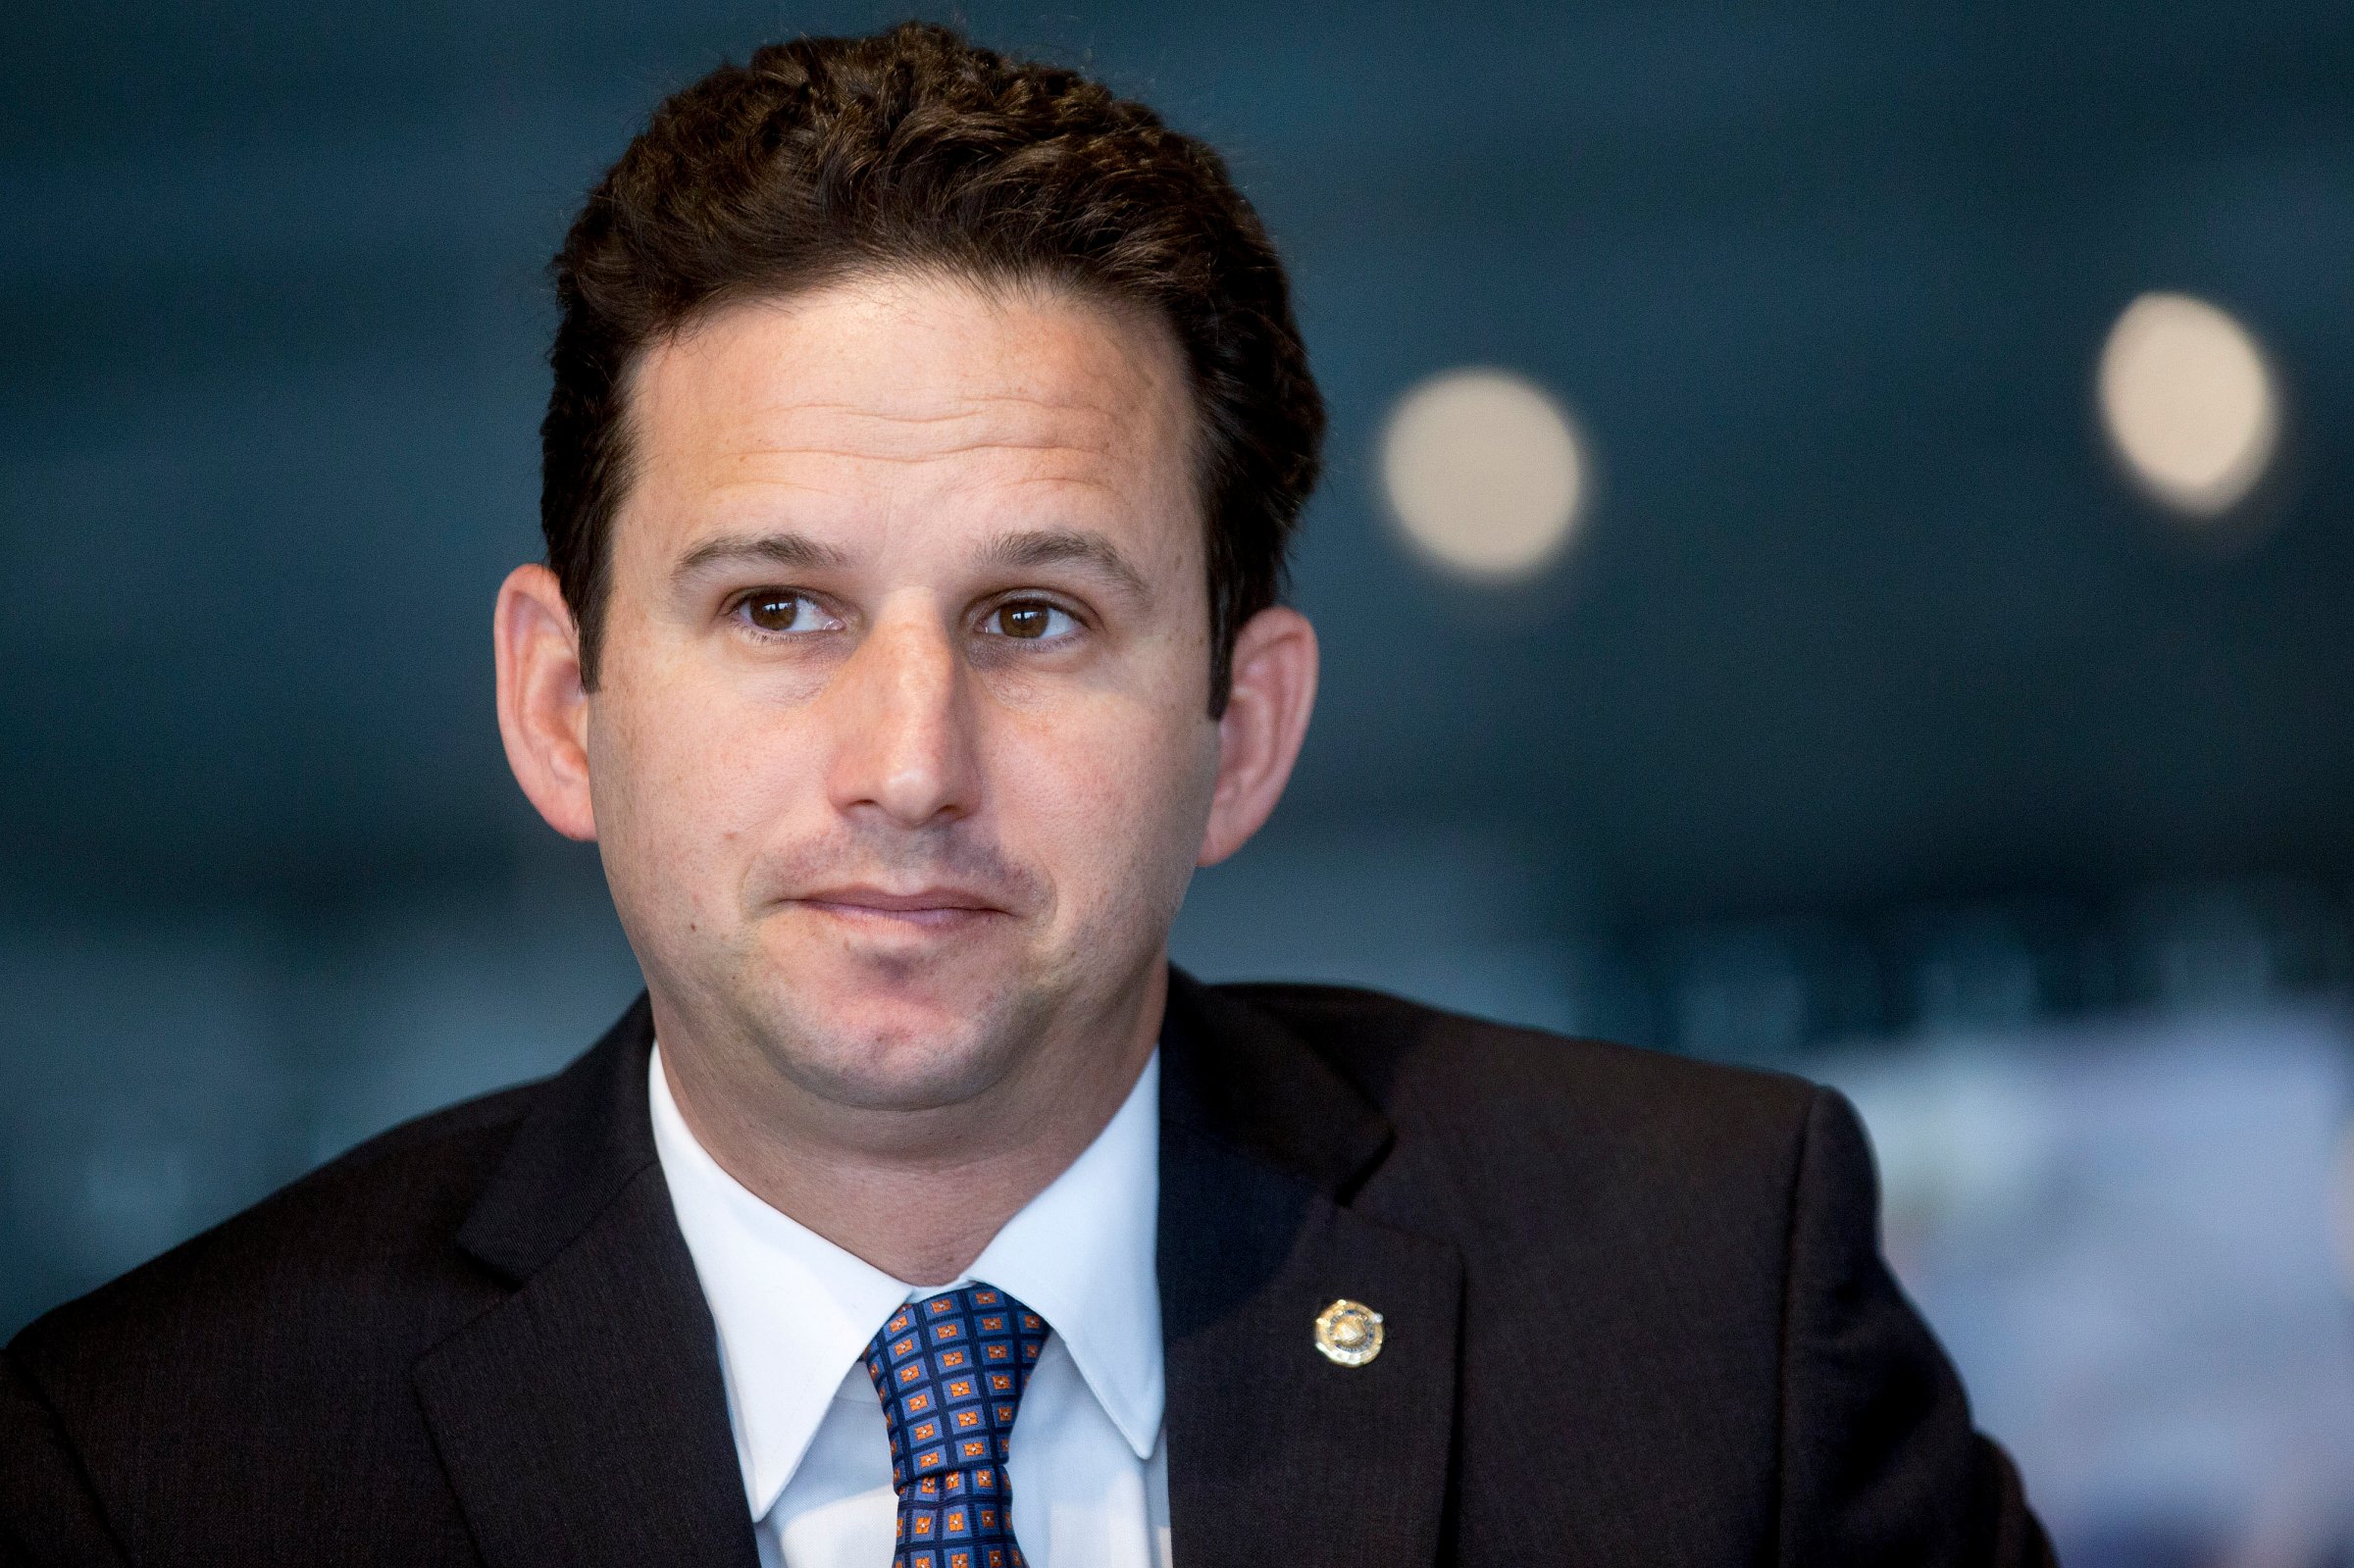 Senator Brian Schatz, a Democrat from Hawaii, listens to a question during an interview in Washington, D.C., U.S., on May 7, 2015.